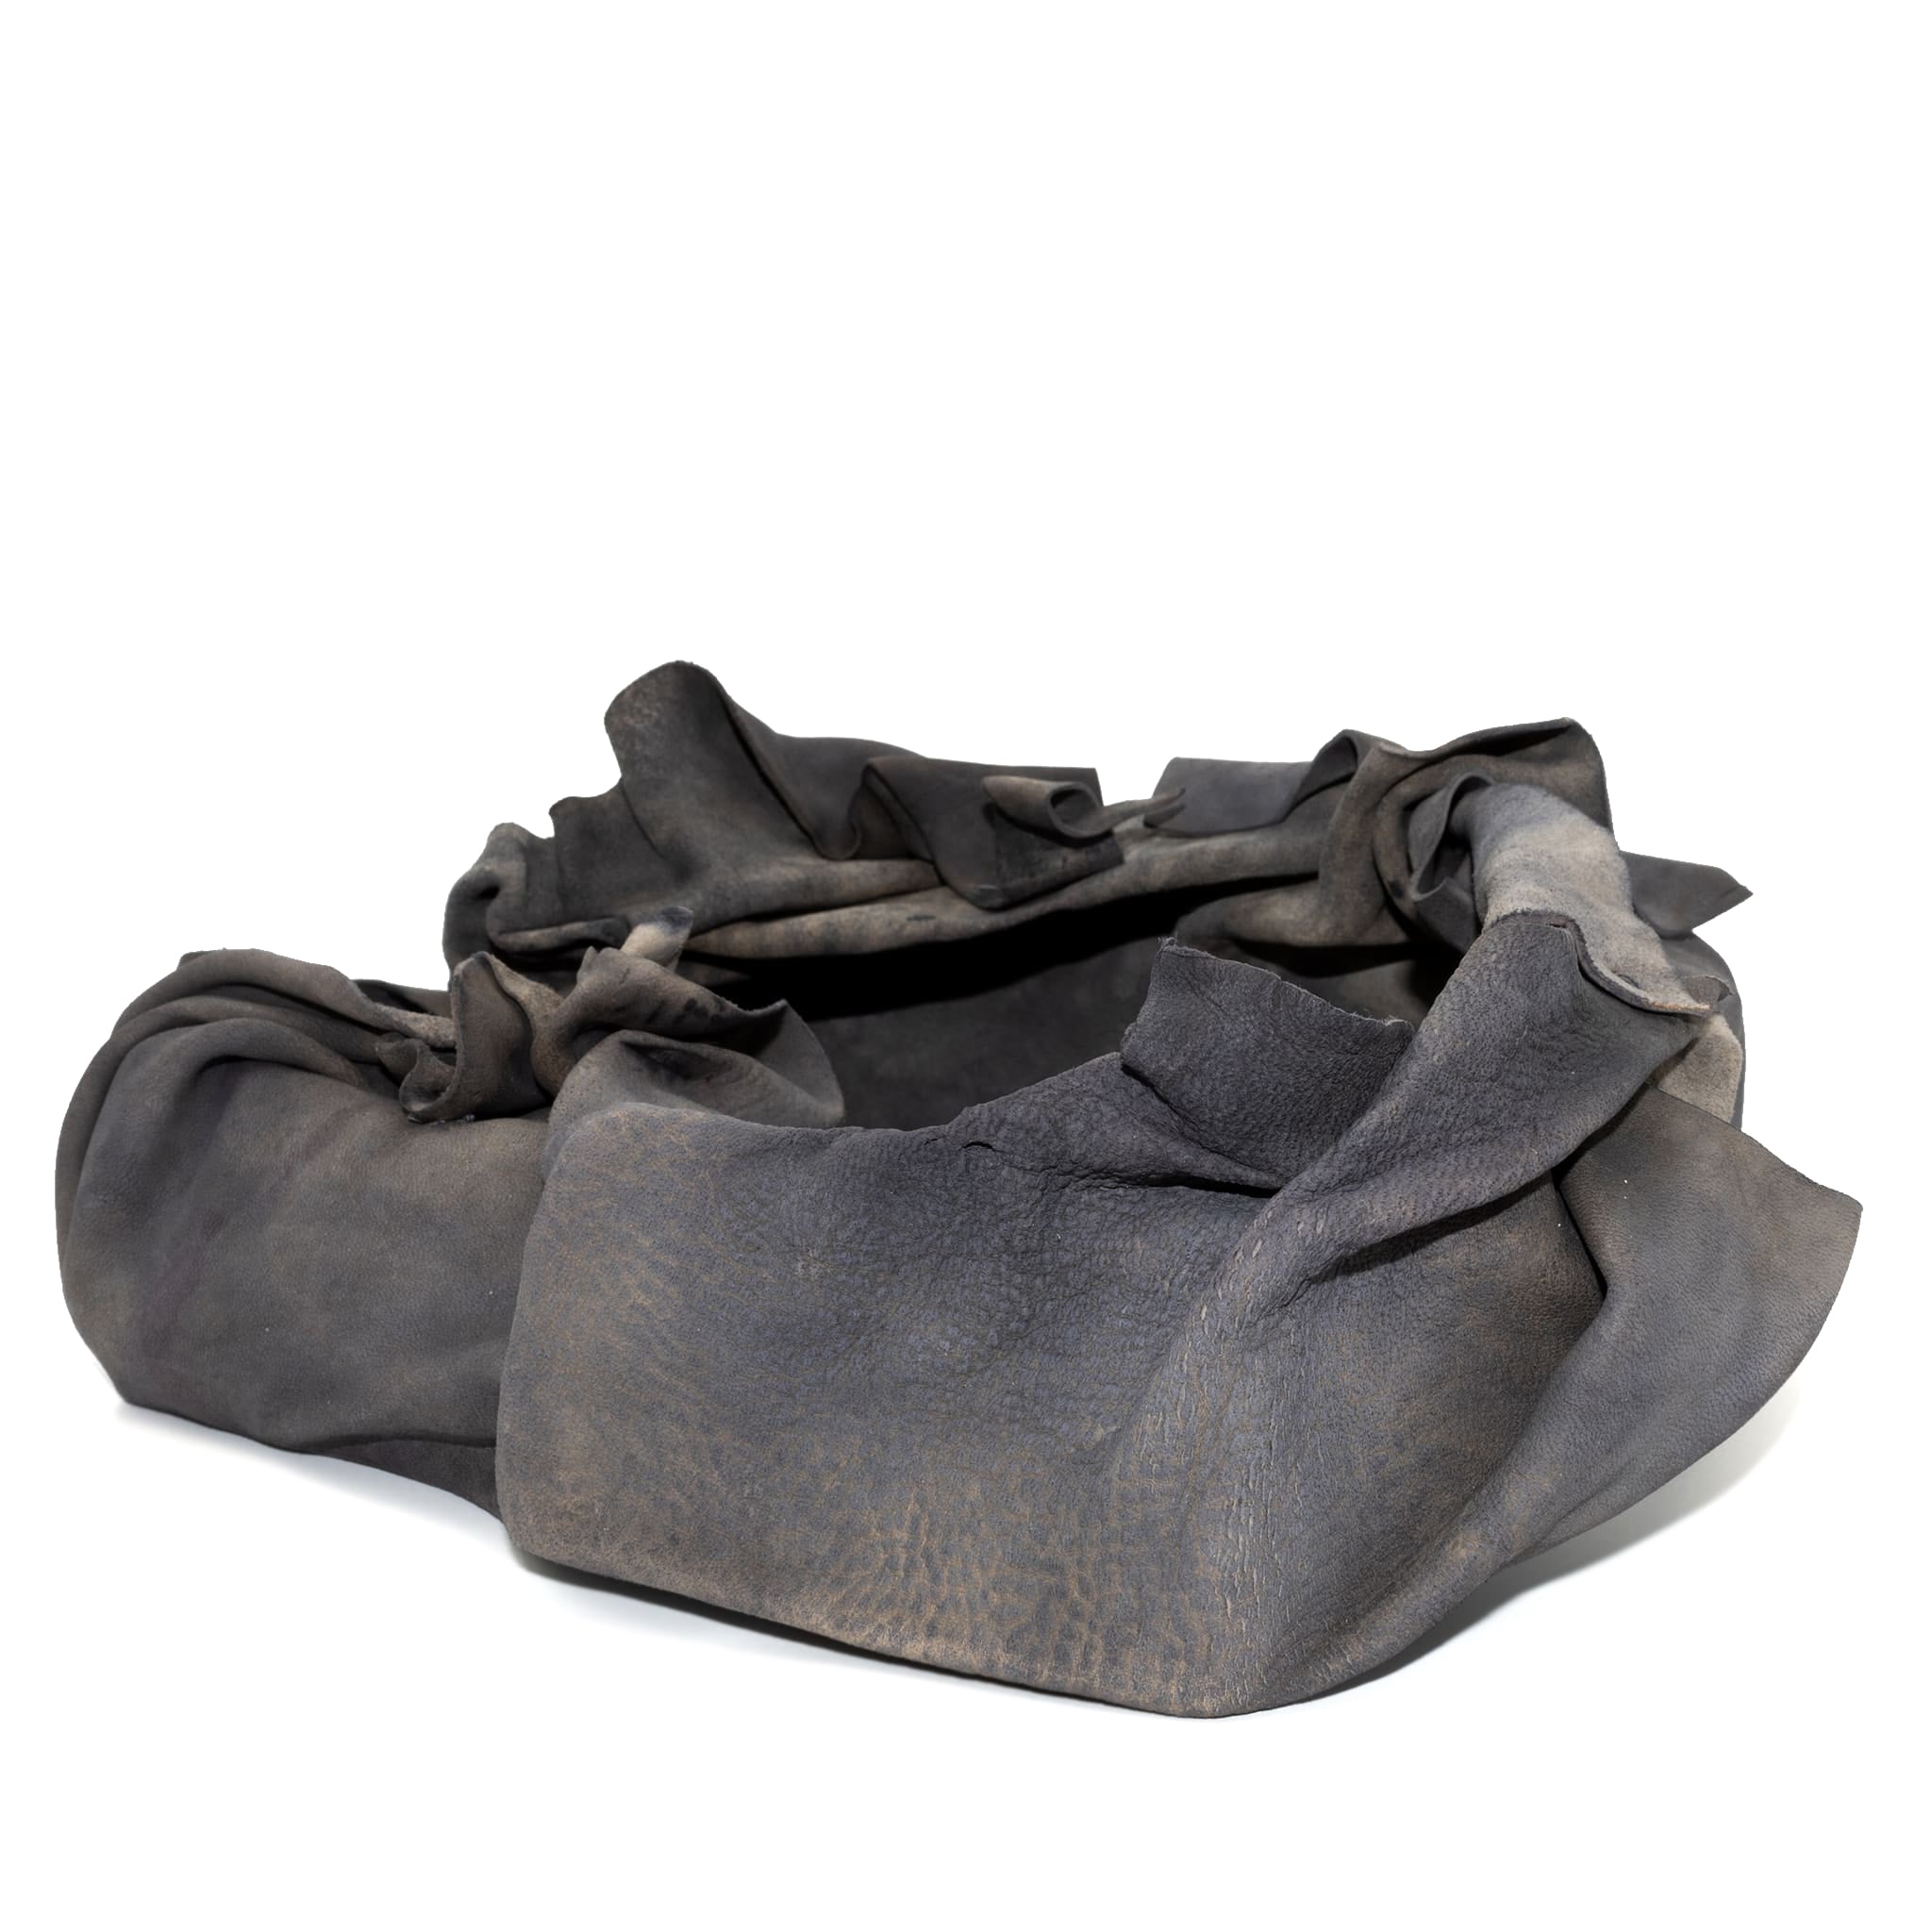 atelier skn | iron dyed wet moulded abstract horse culatta leather tray